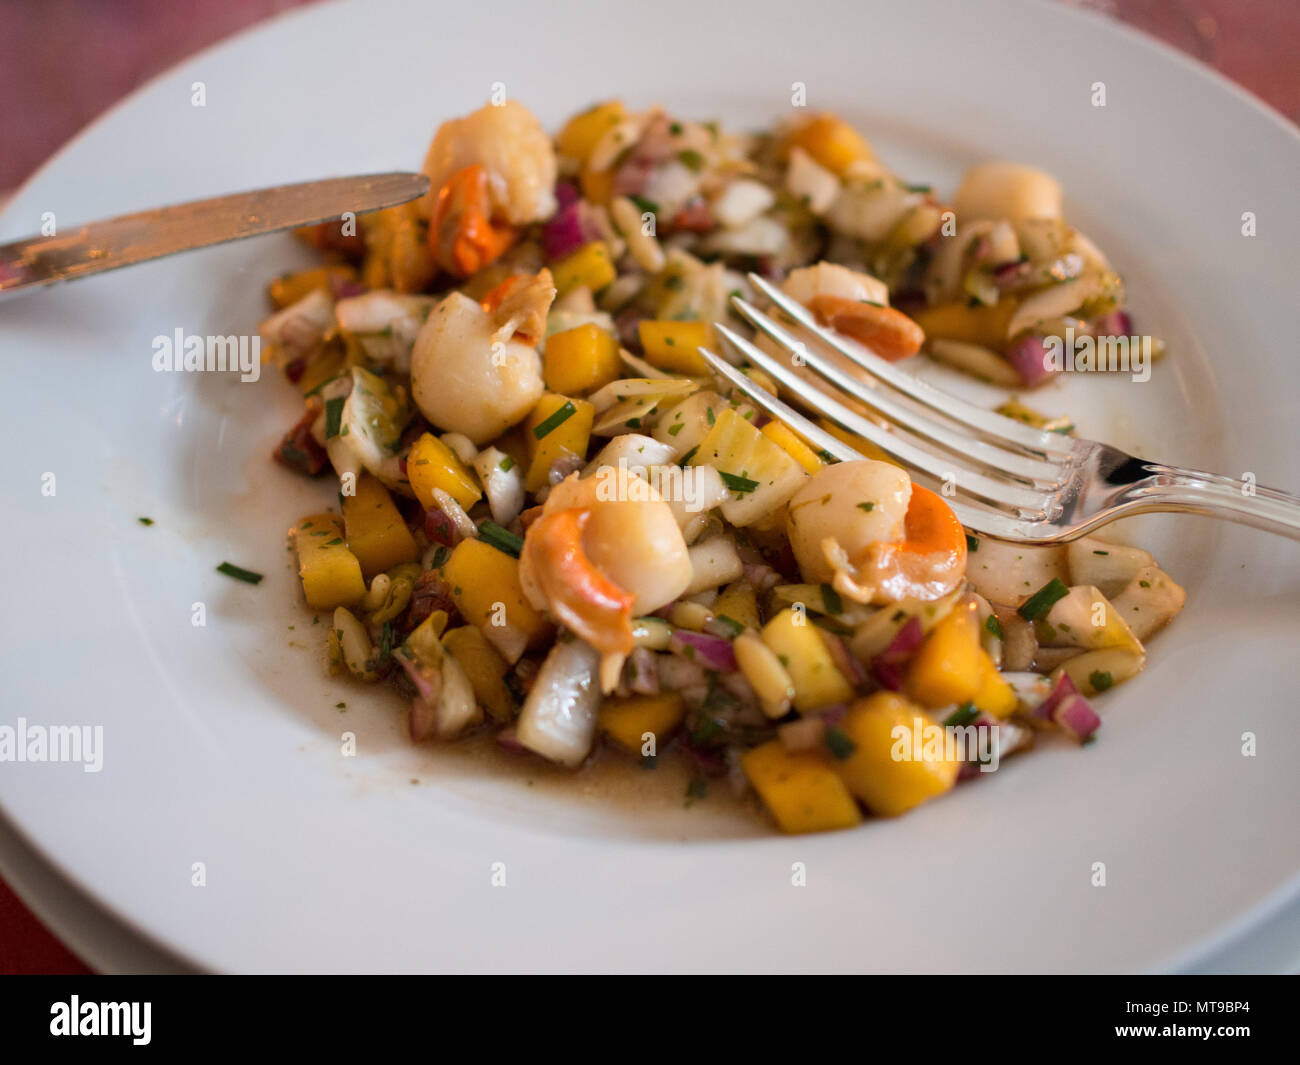 Plate with scallop shells Stock Photo